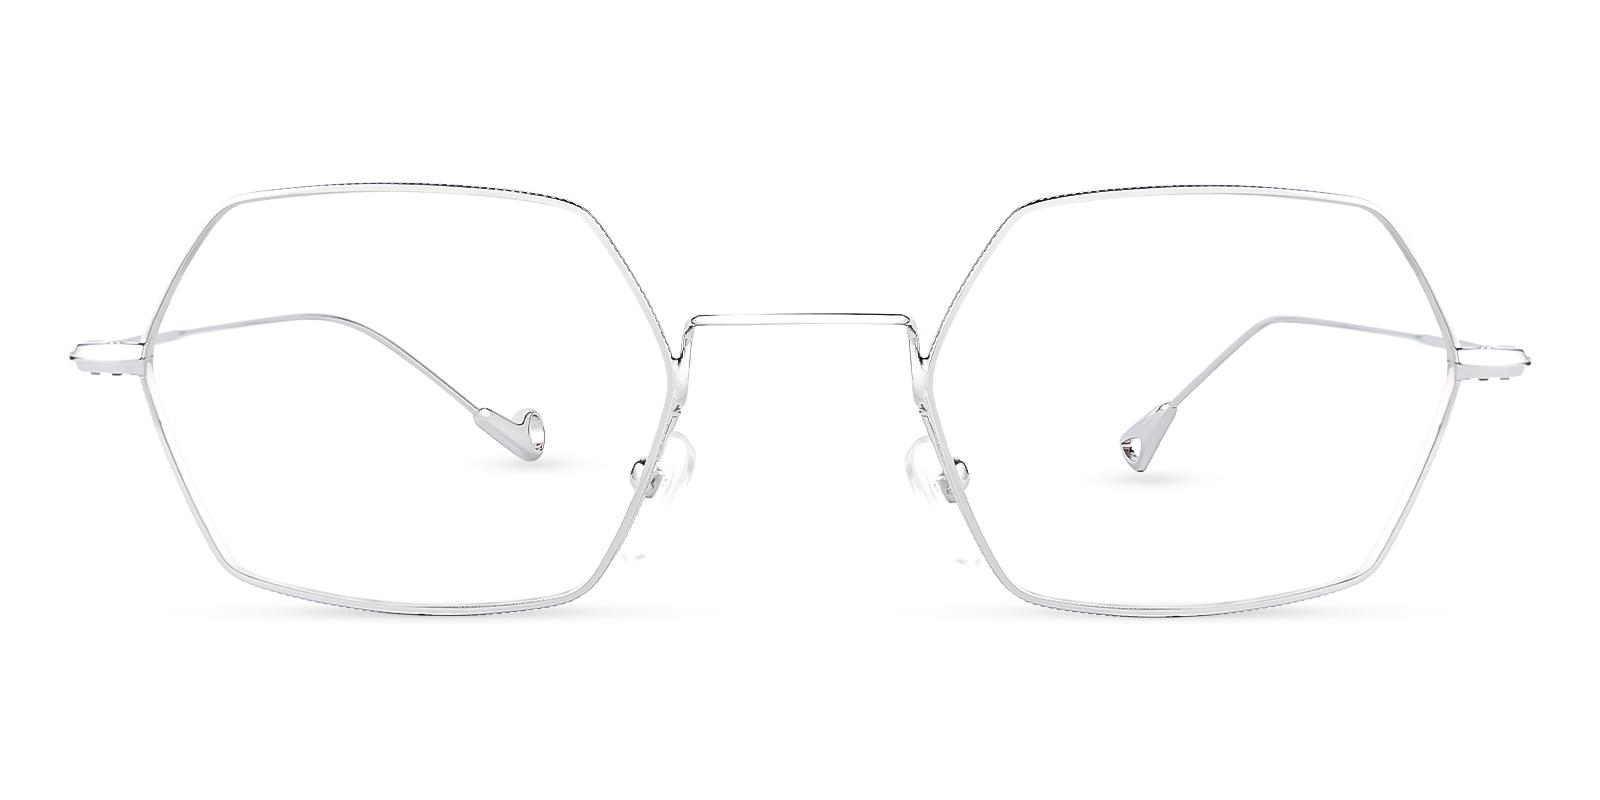 Crystal Silver Metal Eyeglasses , NosePads Frames from ABBE Glasses